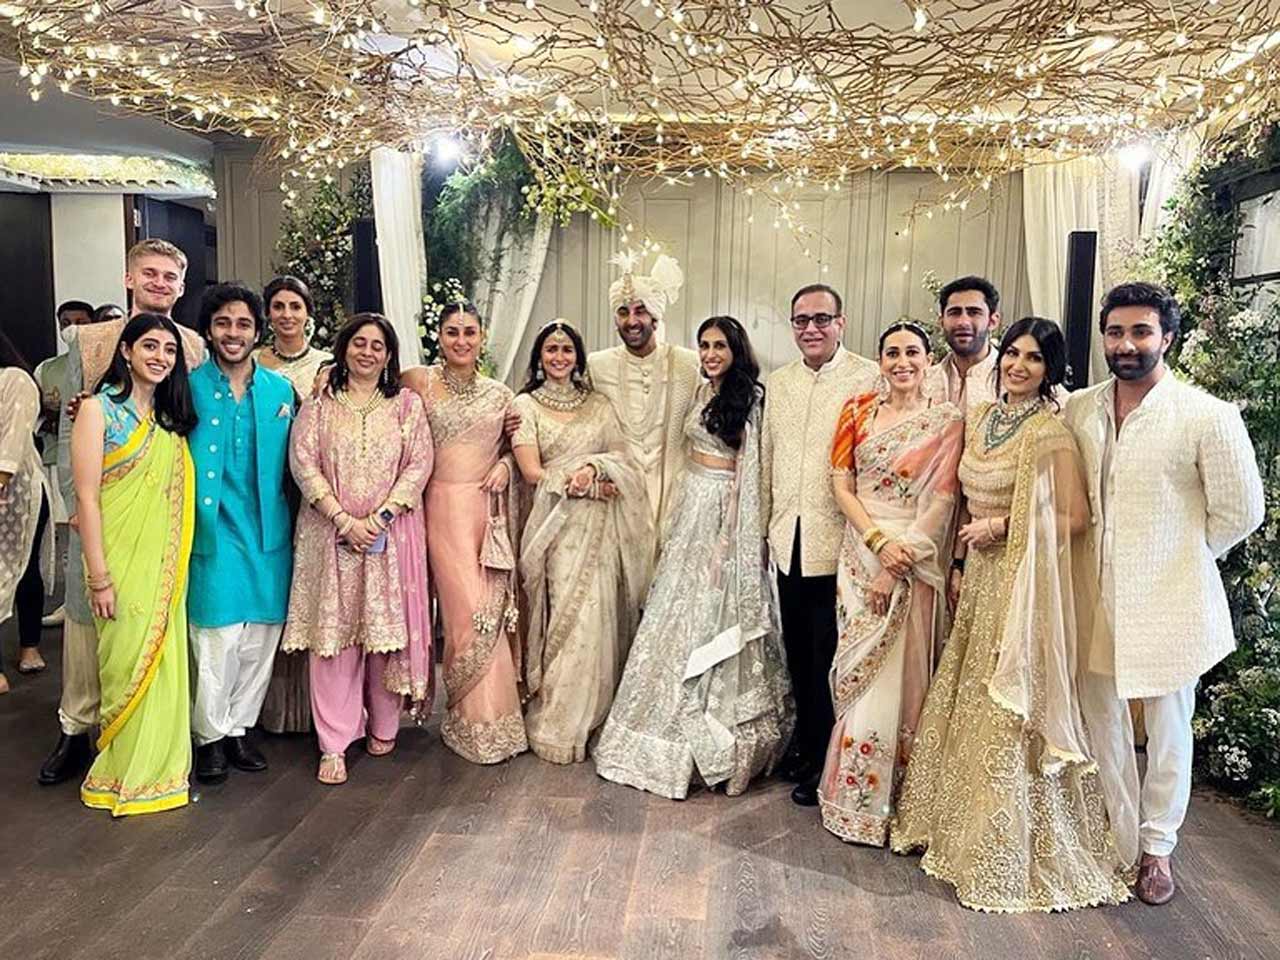 Apart from the couple's family members, the intimate wedding affair was attended by the duo's close friends including filmmaker Karan Johar, Ayan Mukerji and Alia's best friend Akanksha Ranjan. Akash Ambani and his wife Shloka Ambani also attended the duo's wedding.
In picture: Take a look at the picture-perfect family.